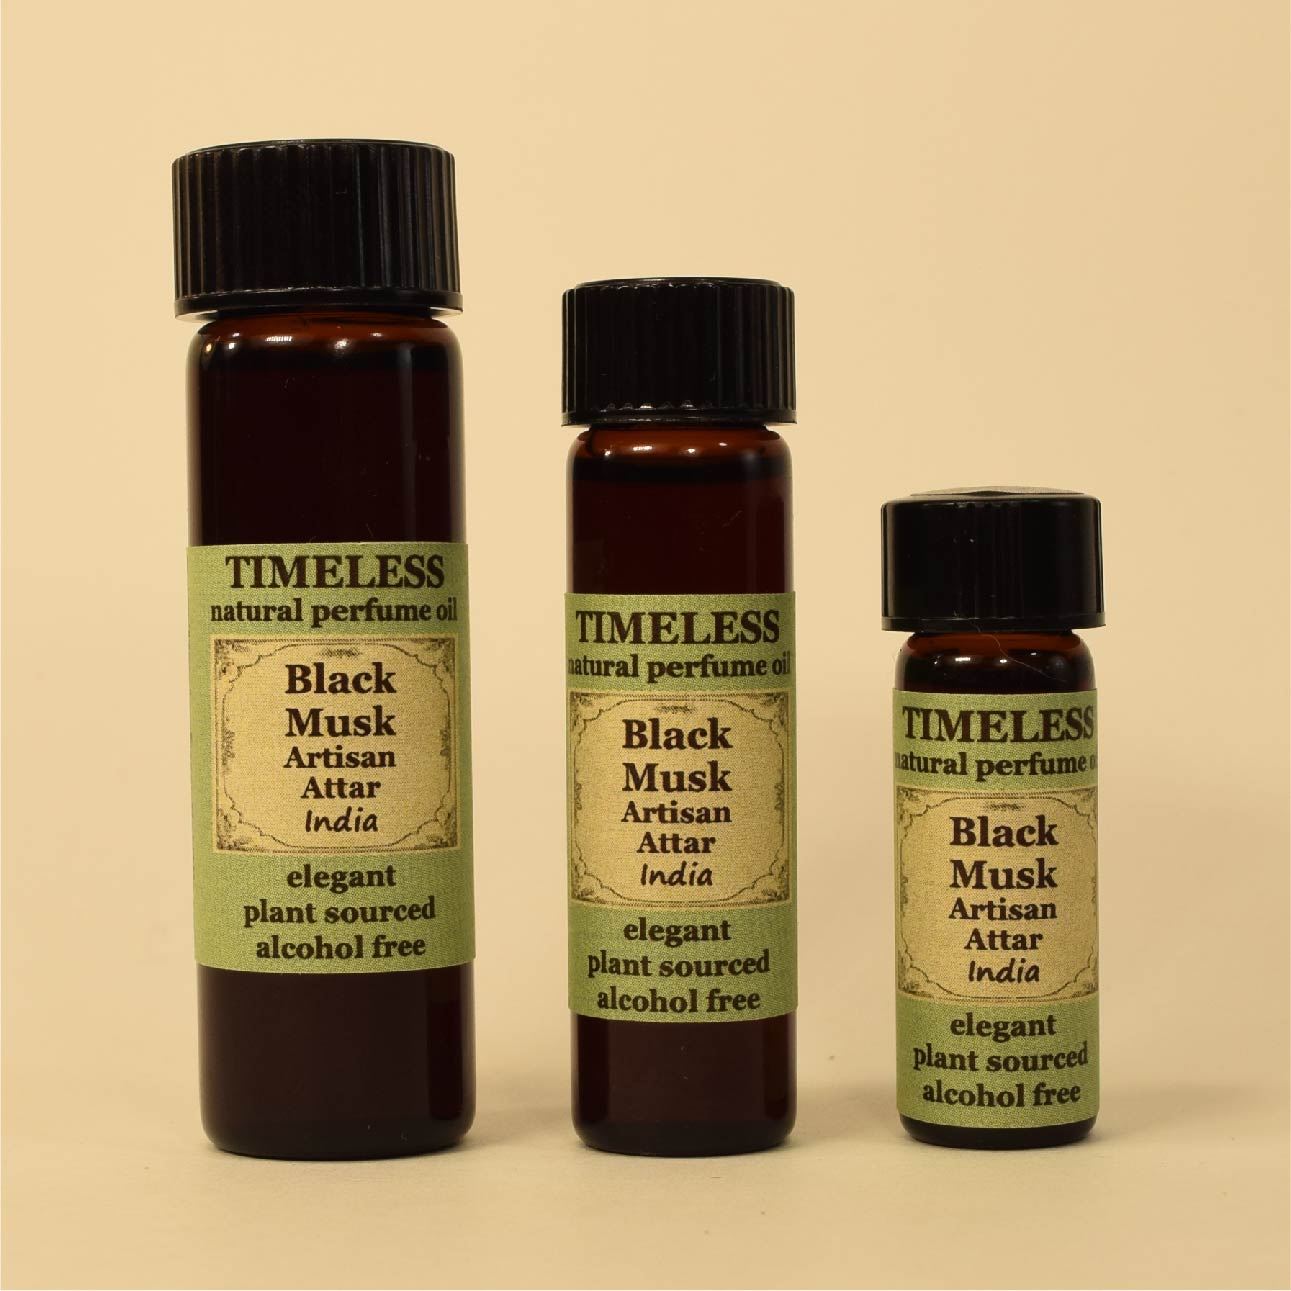 TIMELESS Black Musk Attar has a rich, exotic scent that enhances your unique body chemistry